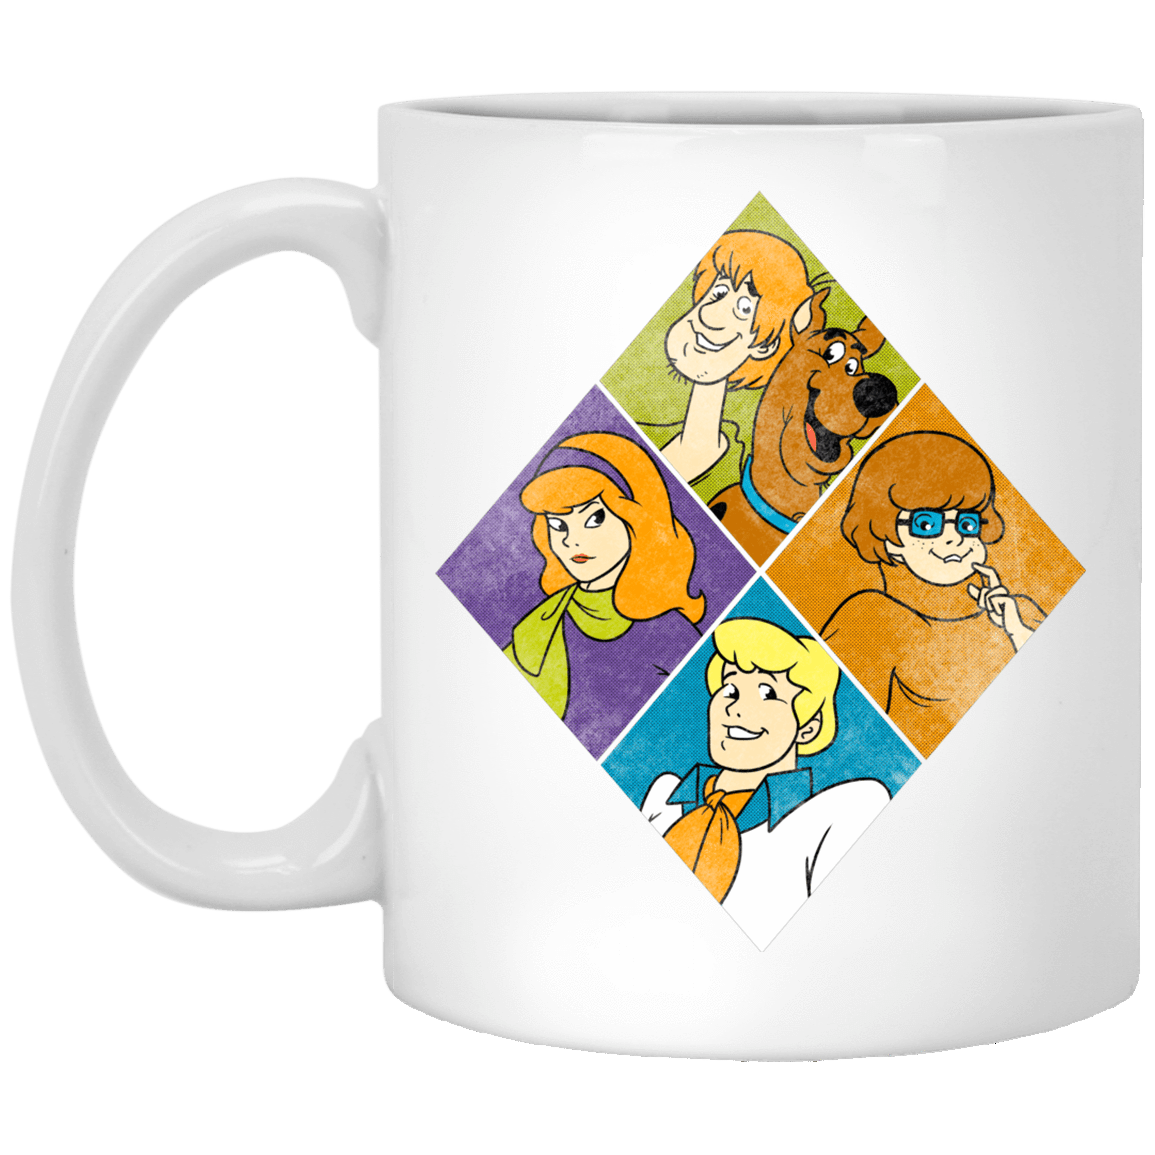 Drinkware White / One Size Scooby And The Gang 11oz Mug